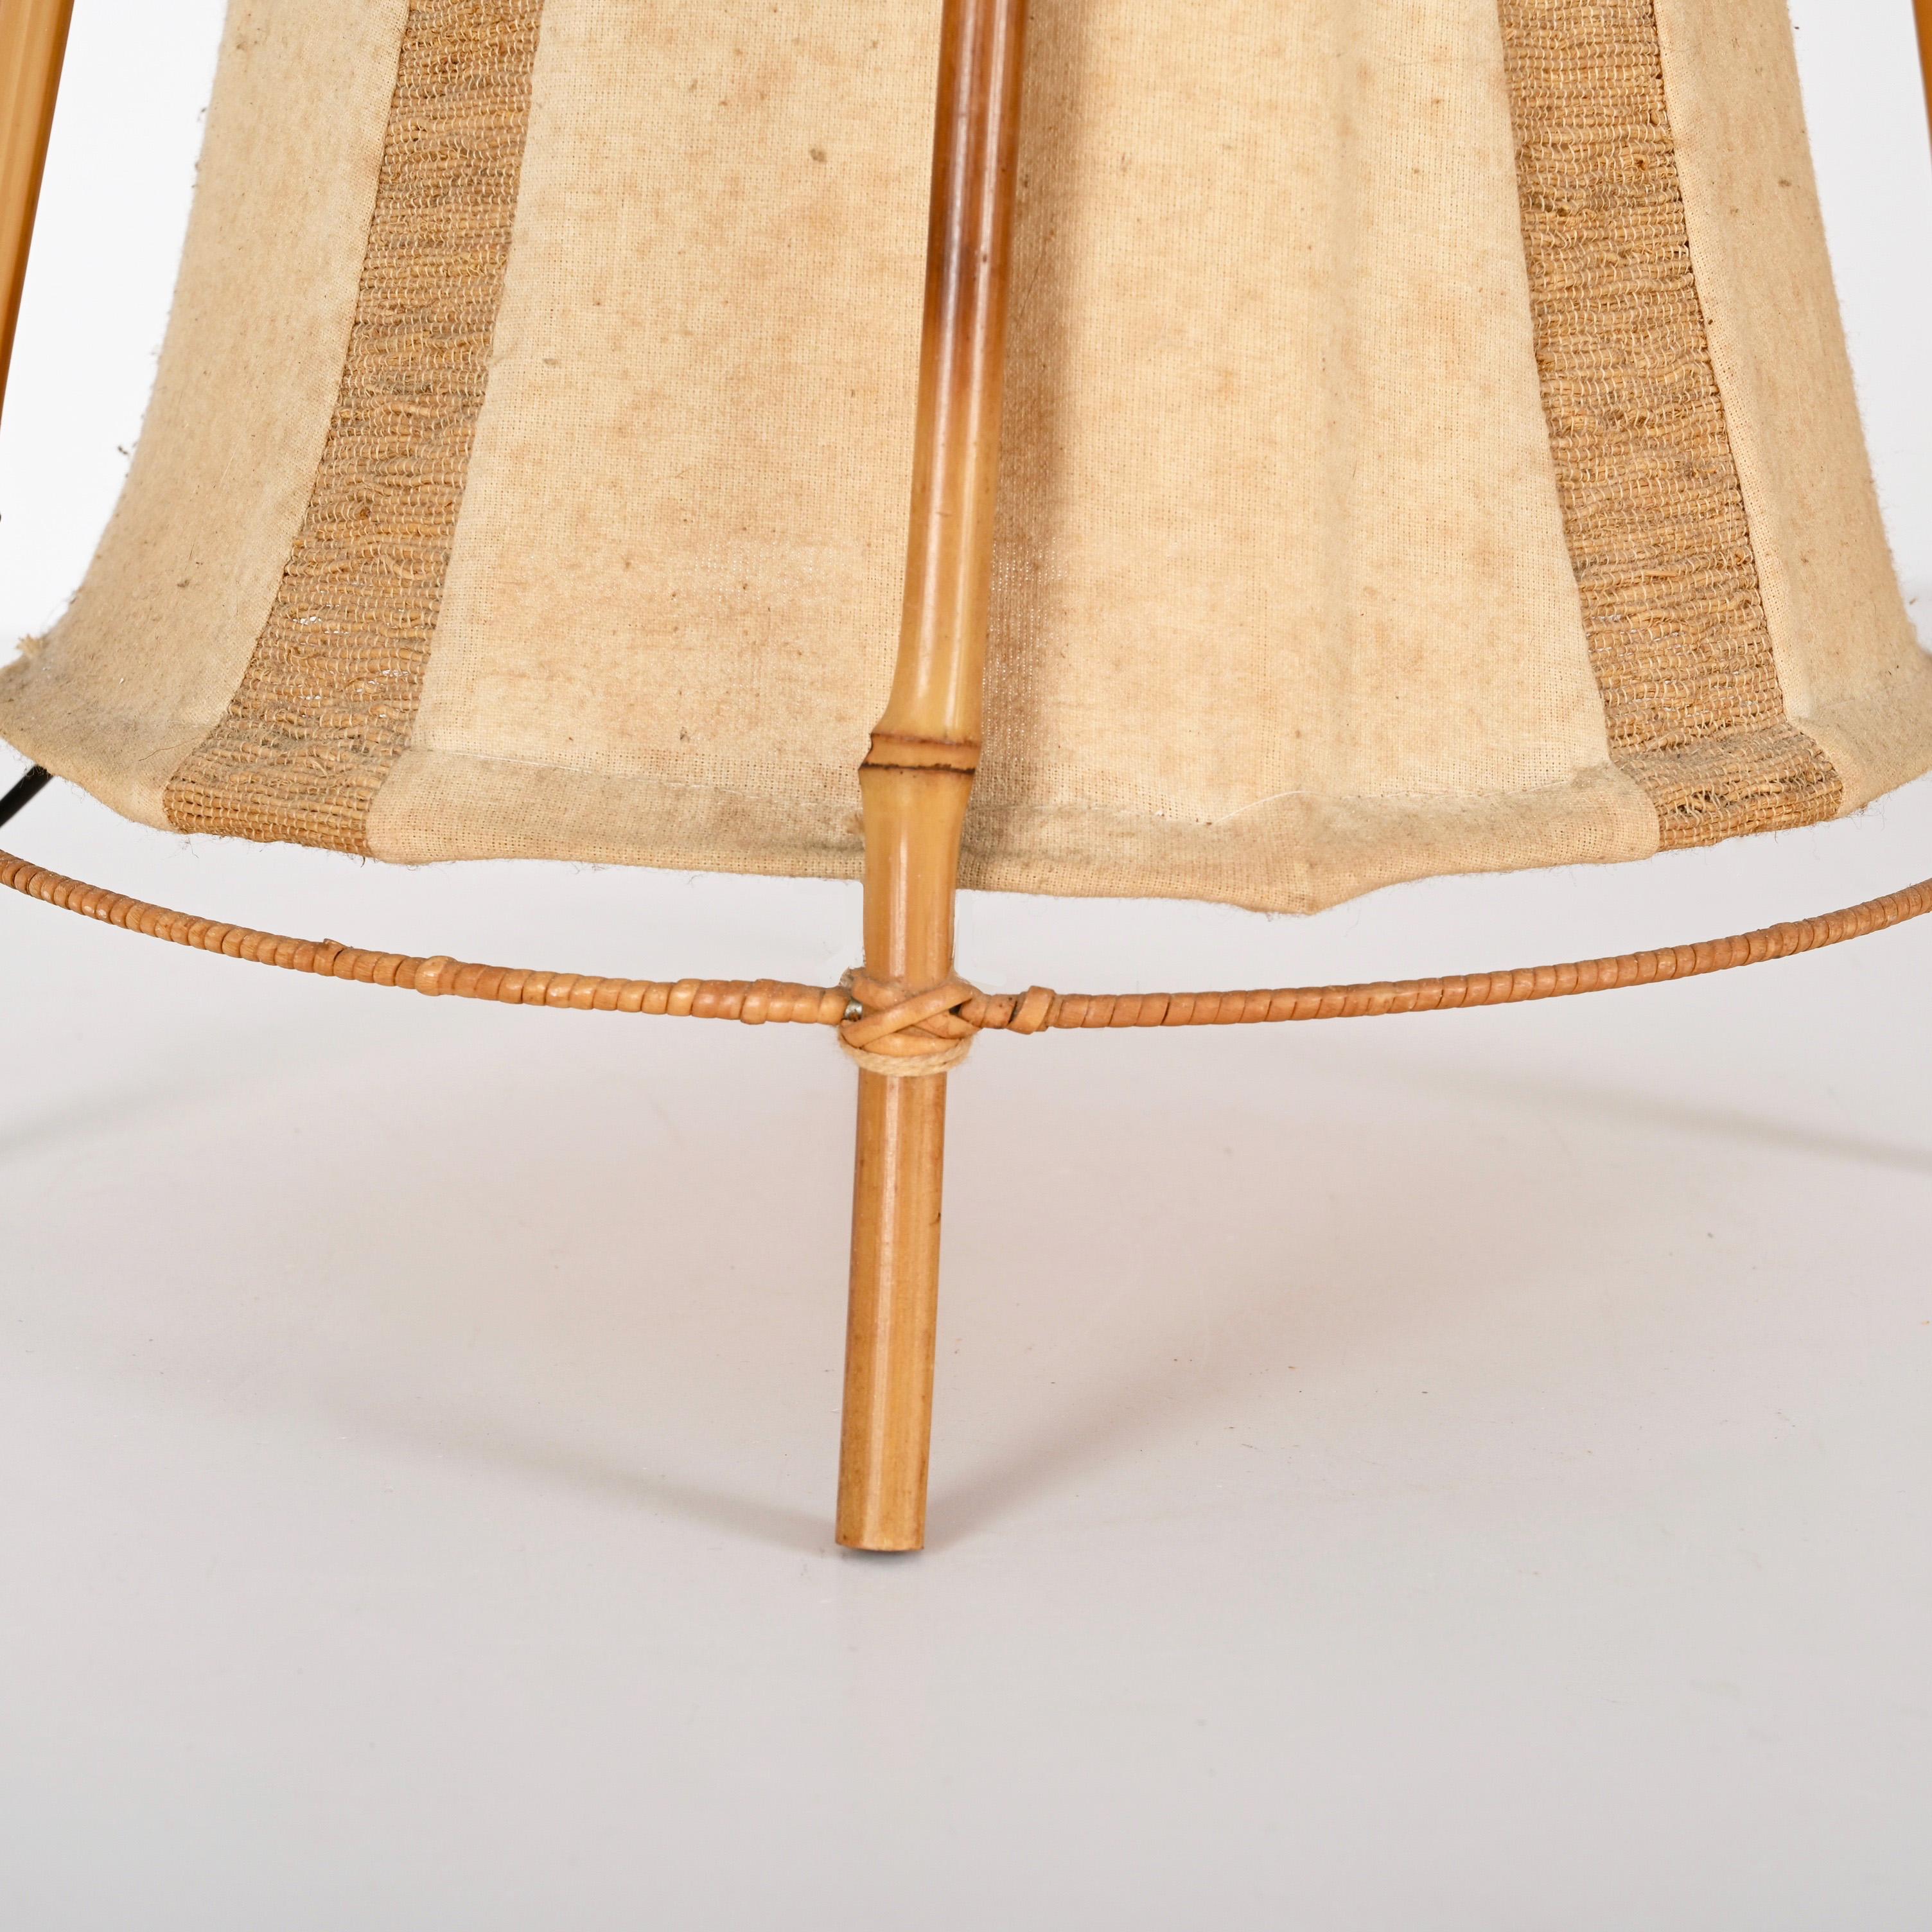 Louis Sognot Midcentury Cotton, Bamboo and Rattan Italian Table Lamp, 1960s For Sale 2